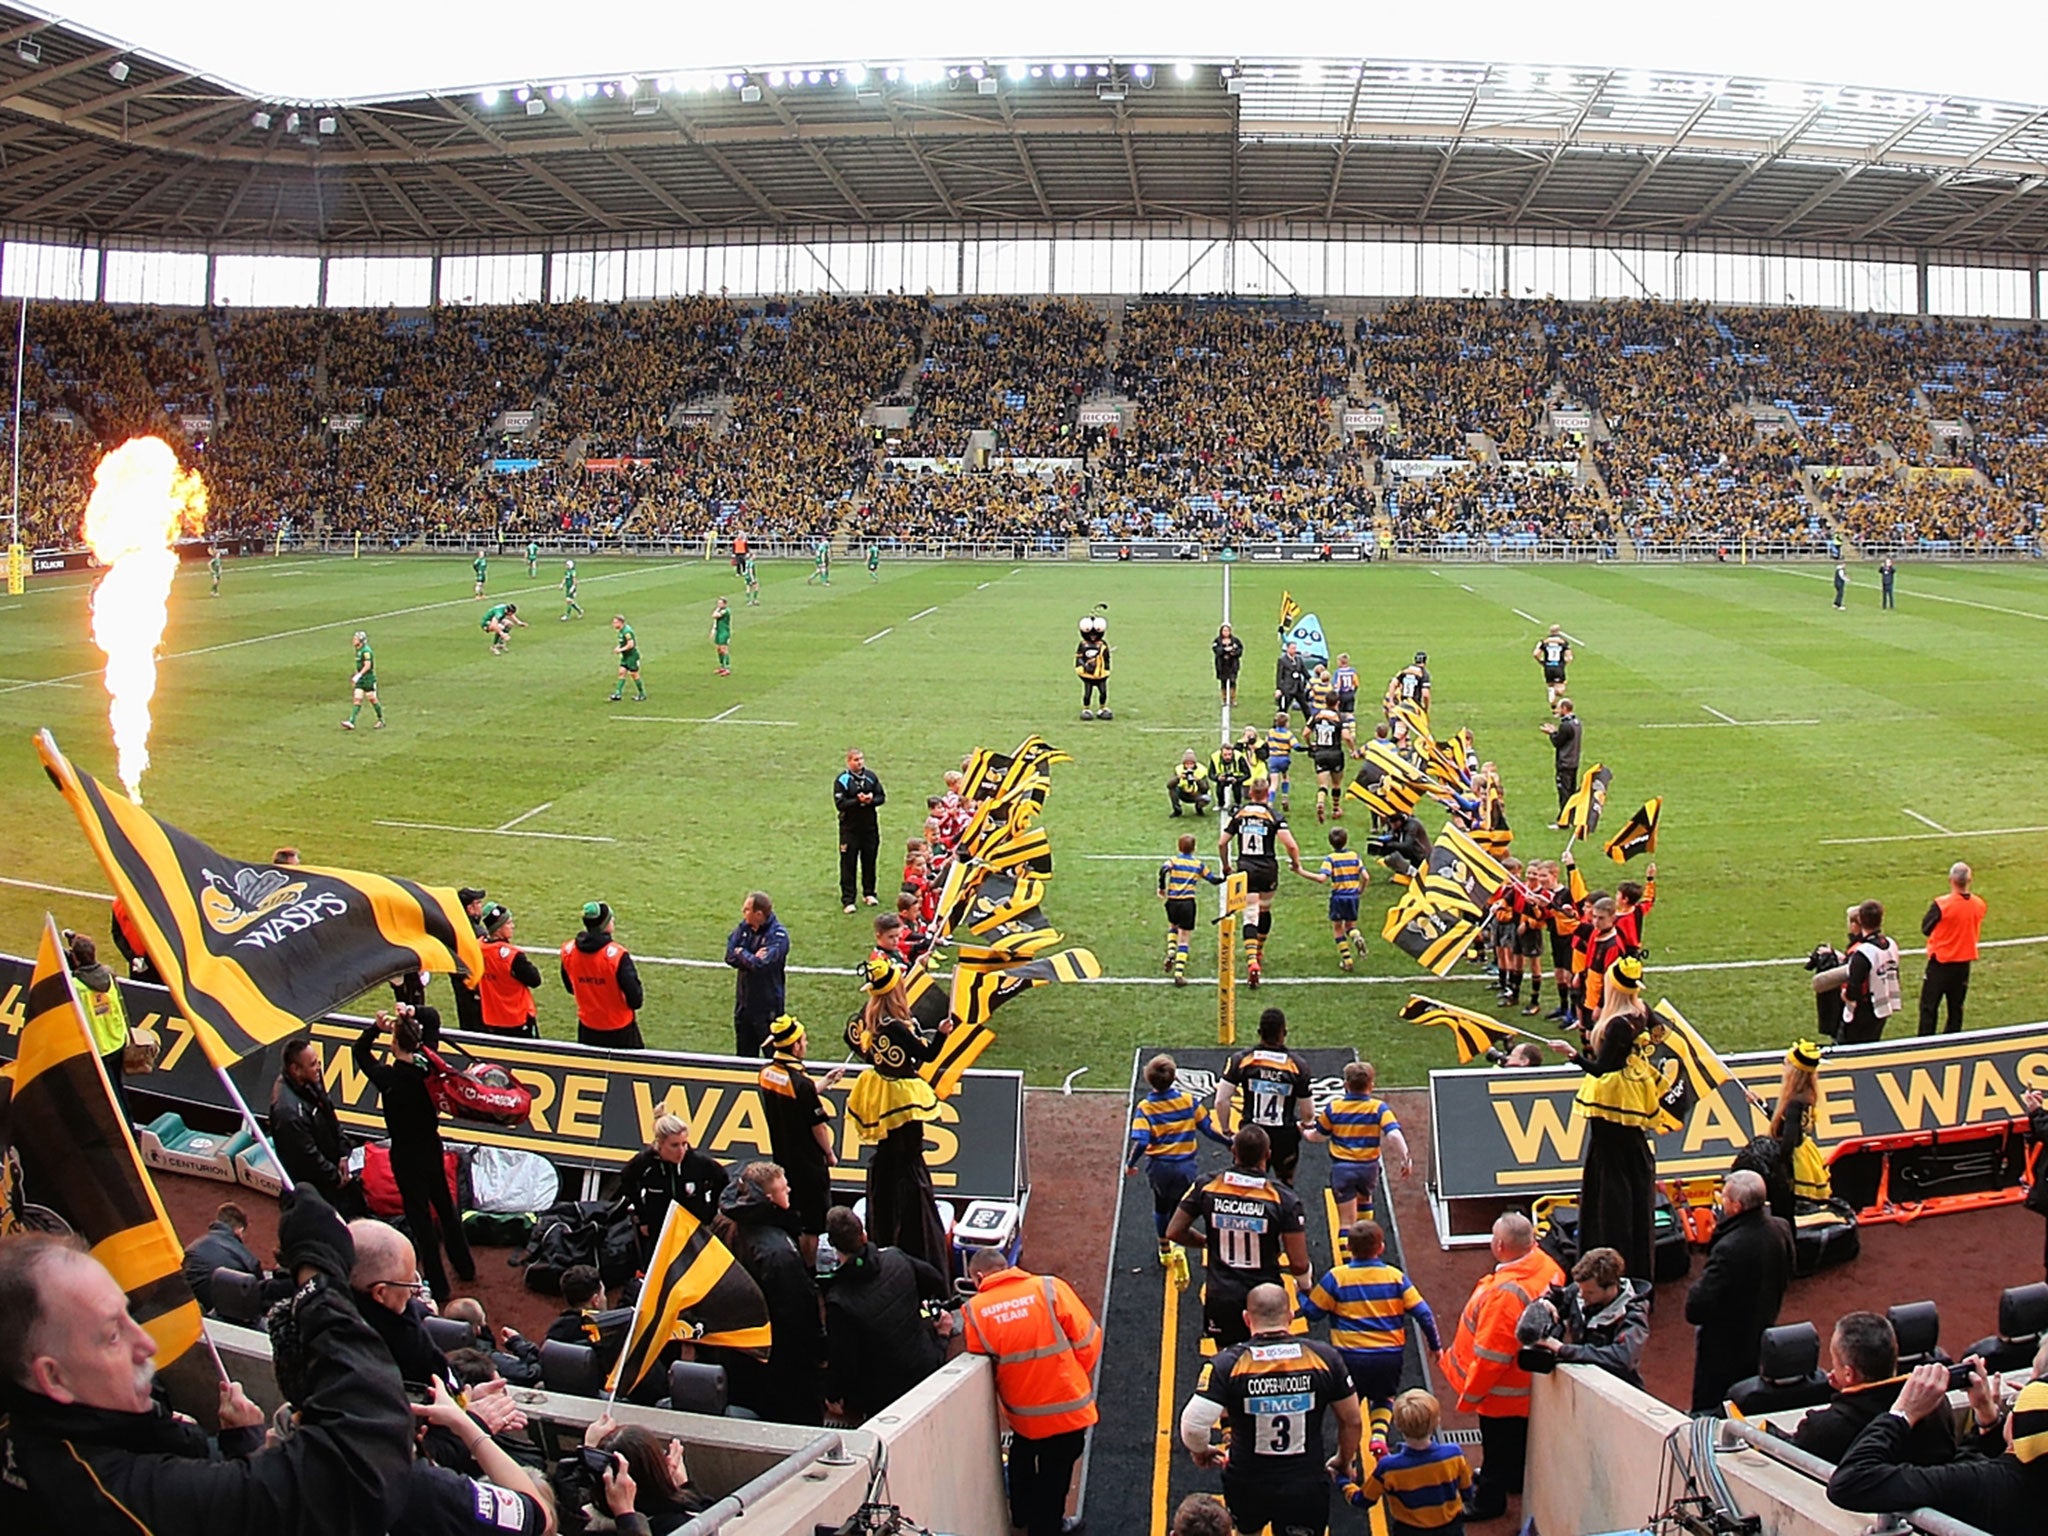 The Wasps team run on to the pitch for their first game at the Ricoh Arena, against London Irish, in December